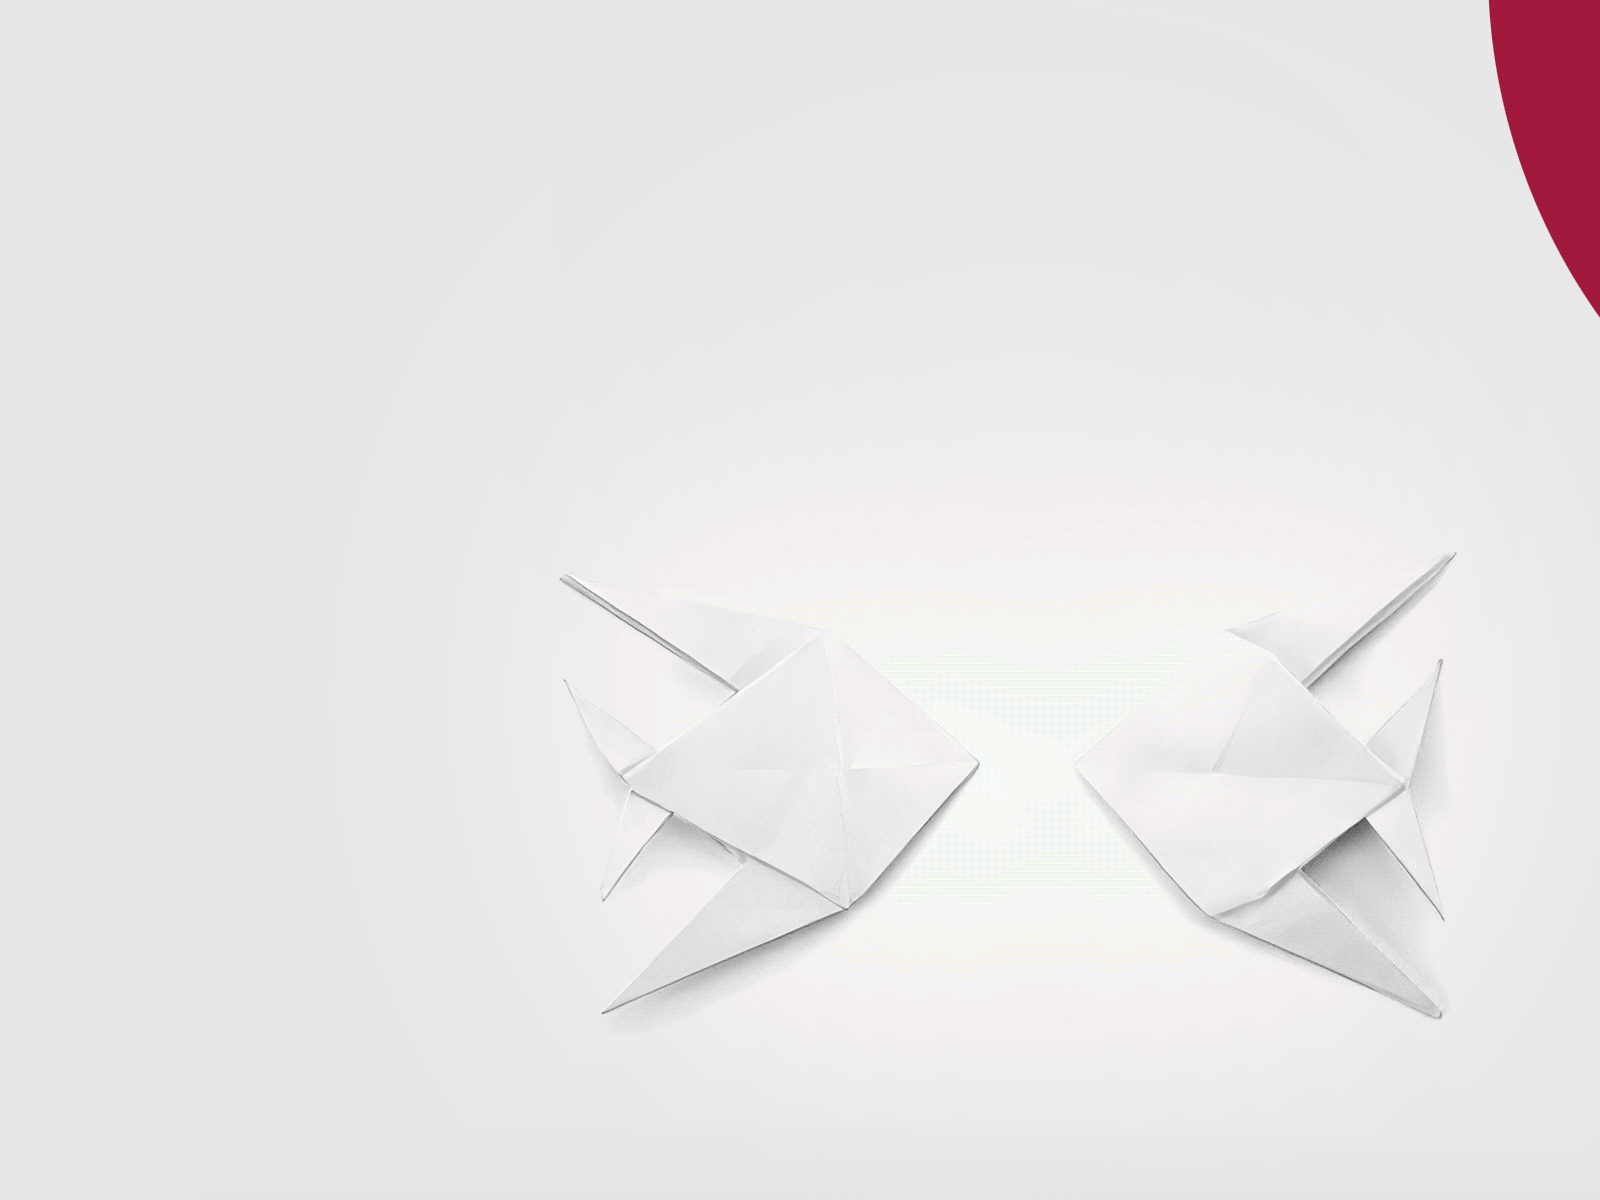 Swiss Life France advertising animal animal art art direction campaign canon company crafts creative creative design creative direction investing investment origami photographer photography photoshop photoshop art social media social network